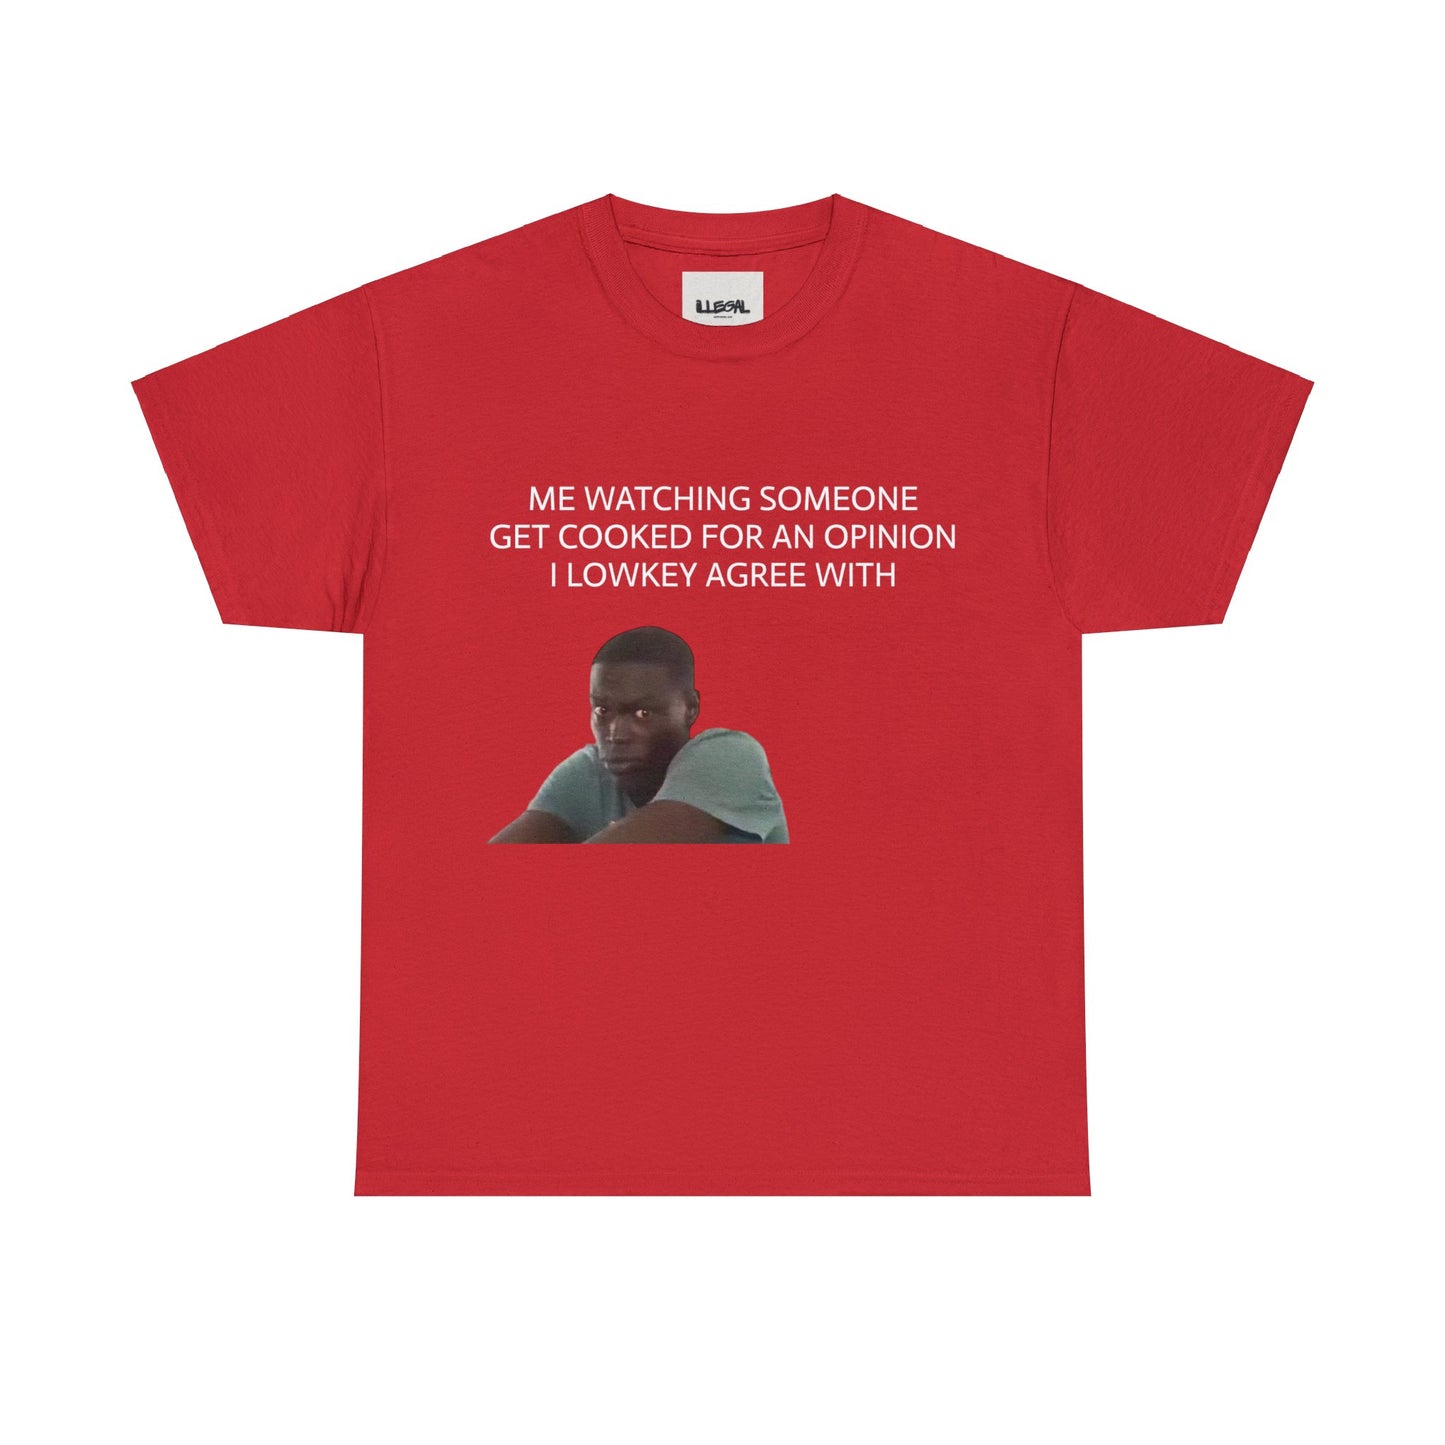 Me atching Someone Get Cooked for an Opinion I lowkey Agree with, Unisex Heavy Cotton Tee